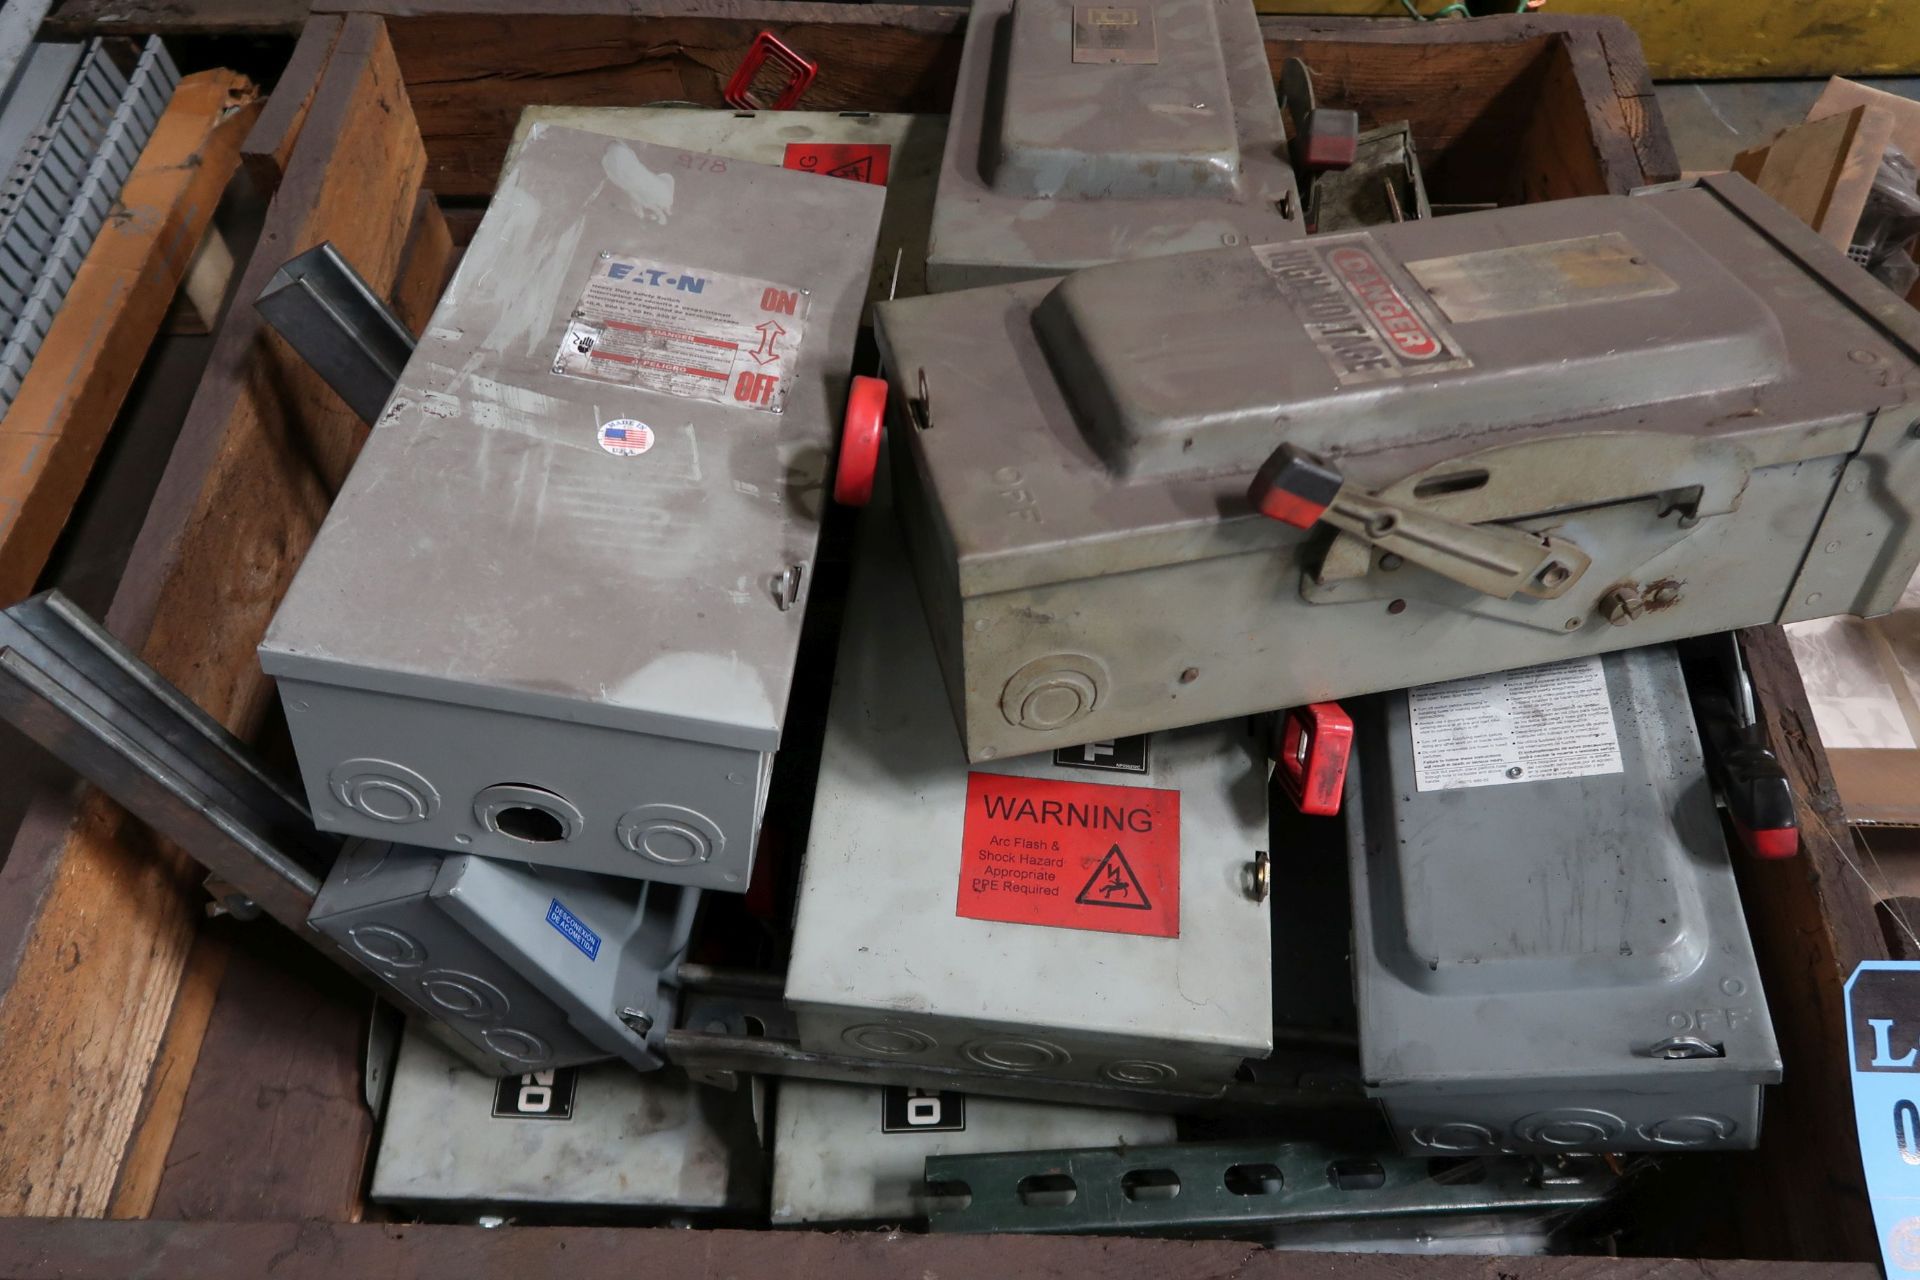 (LOT) ELECTRICAL SWITCHES **LOADING PRICE DUE TO ERRA - $25.00** - Bild 2 aus 3